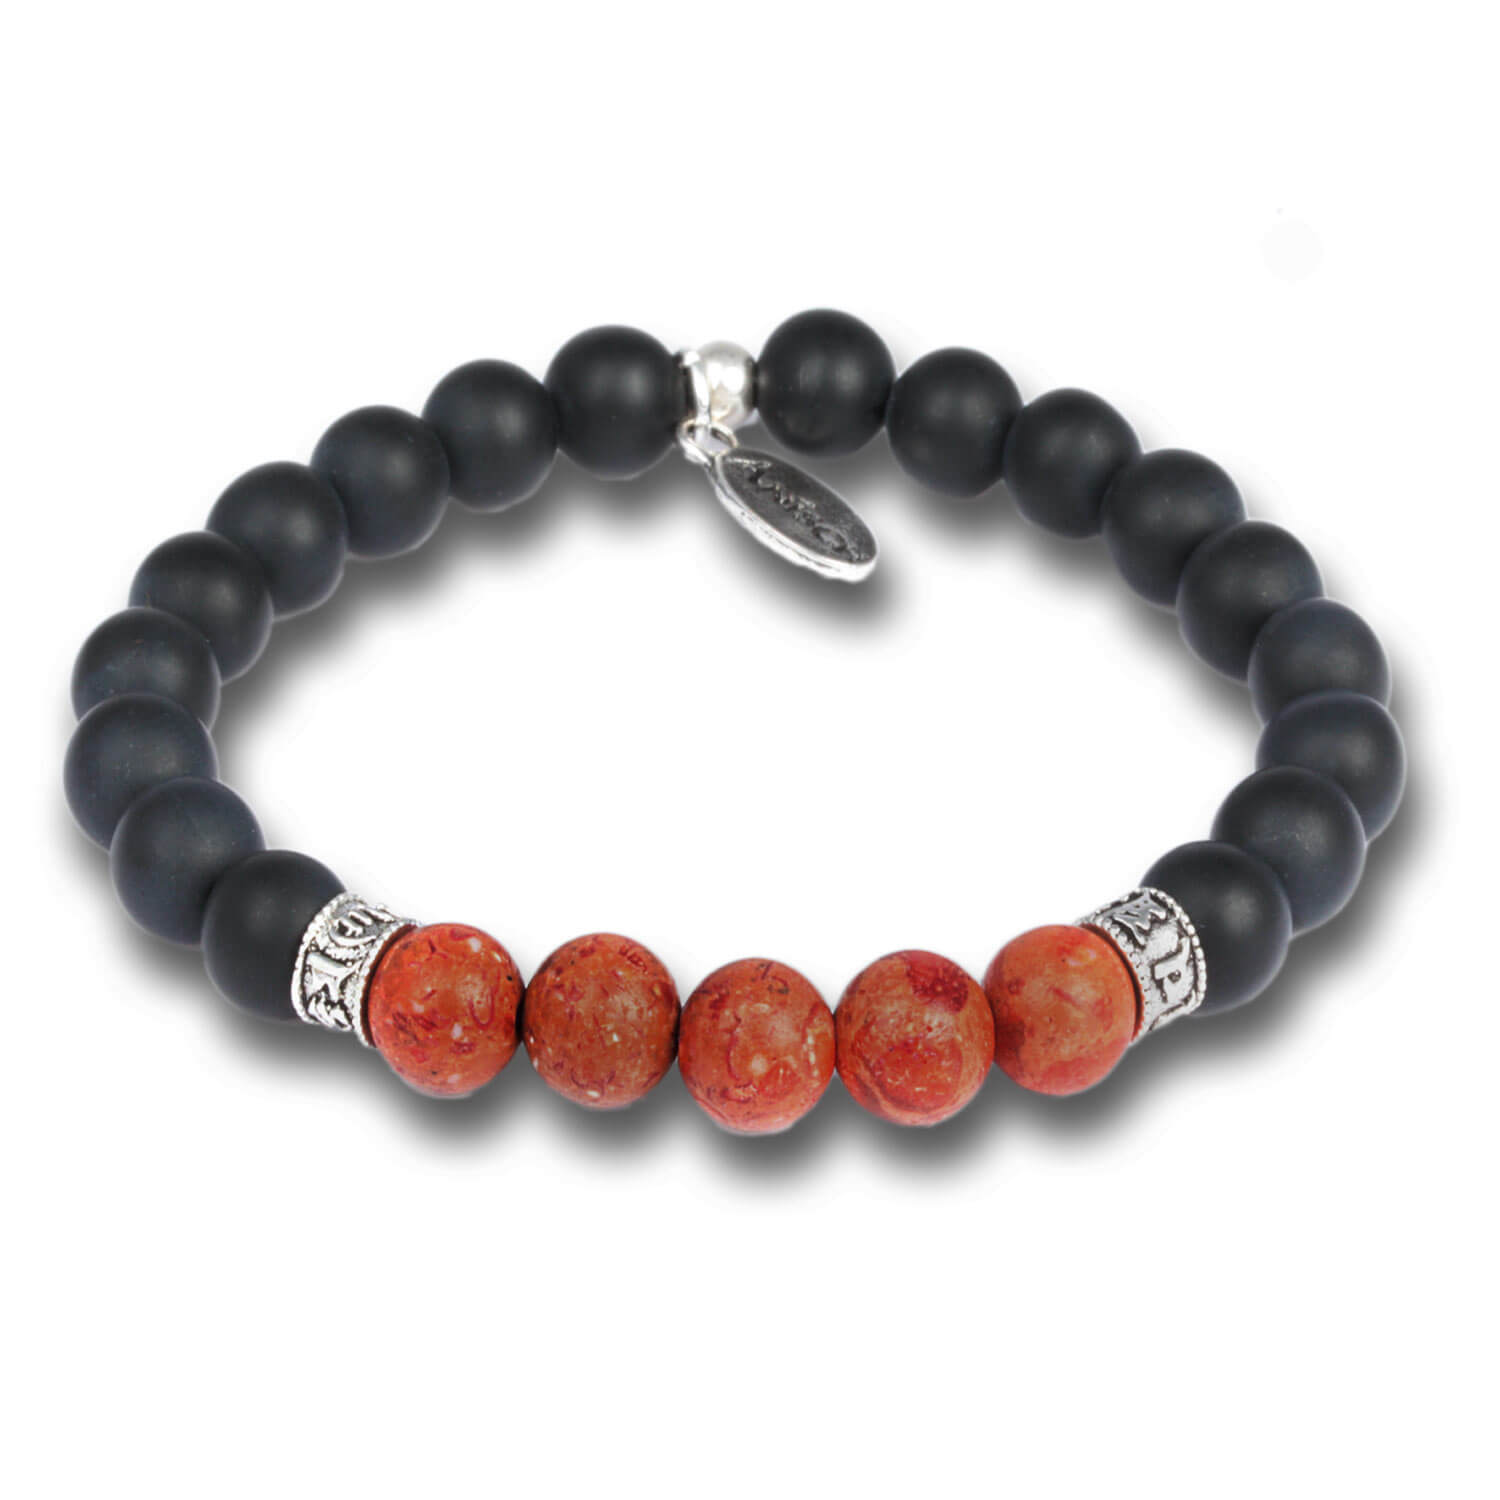 Coral - Mantra Beads gemstone bracelet for men with sterling silver, 8 mm